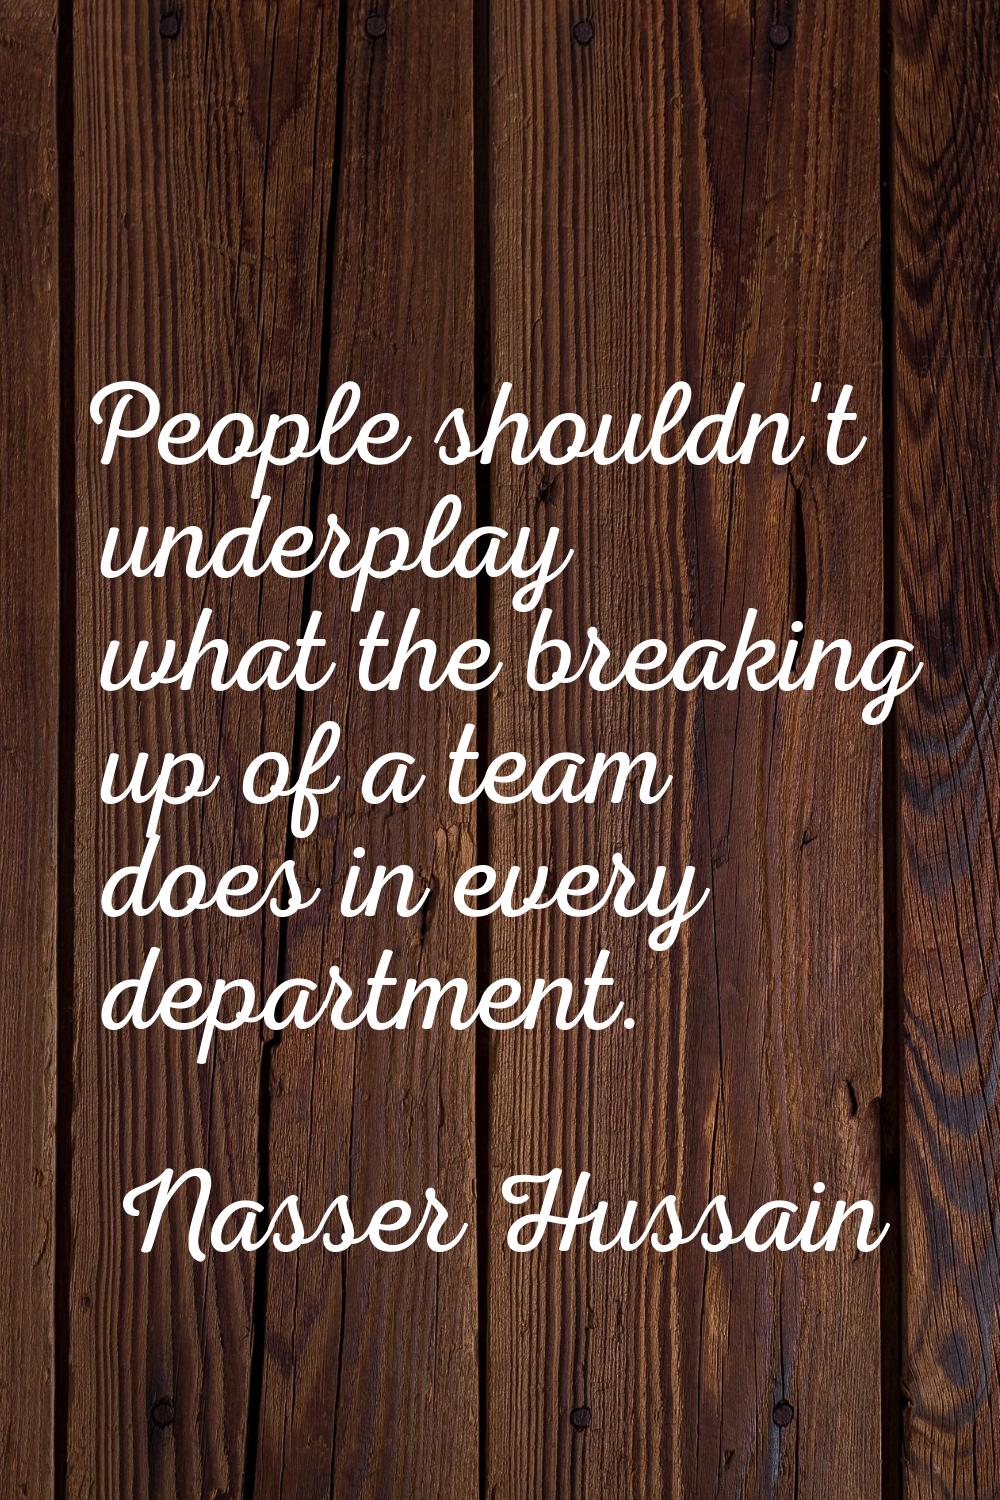 People shouldn't underplay what the breaking up of a team does in every department.